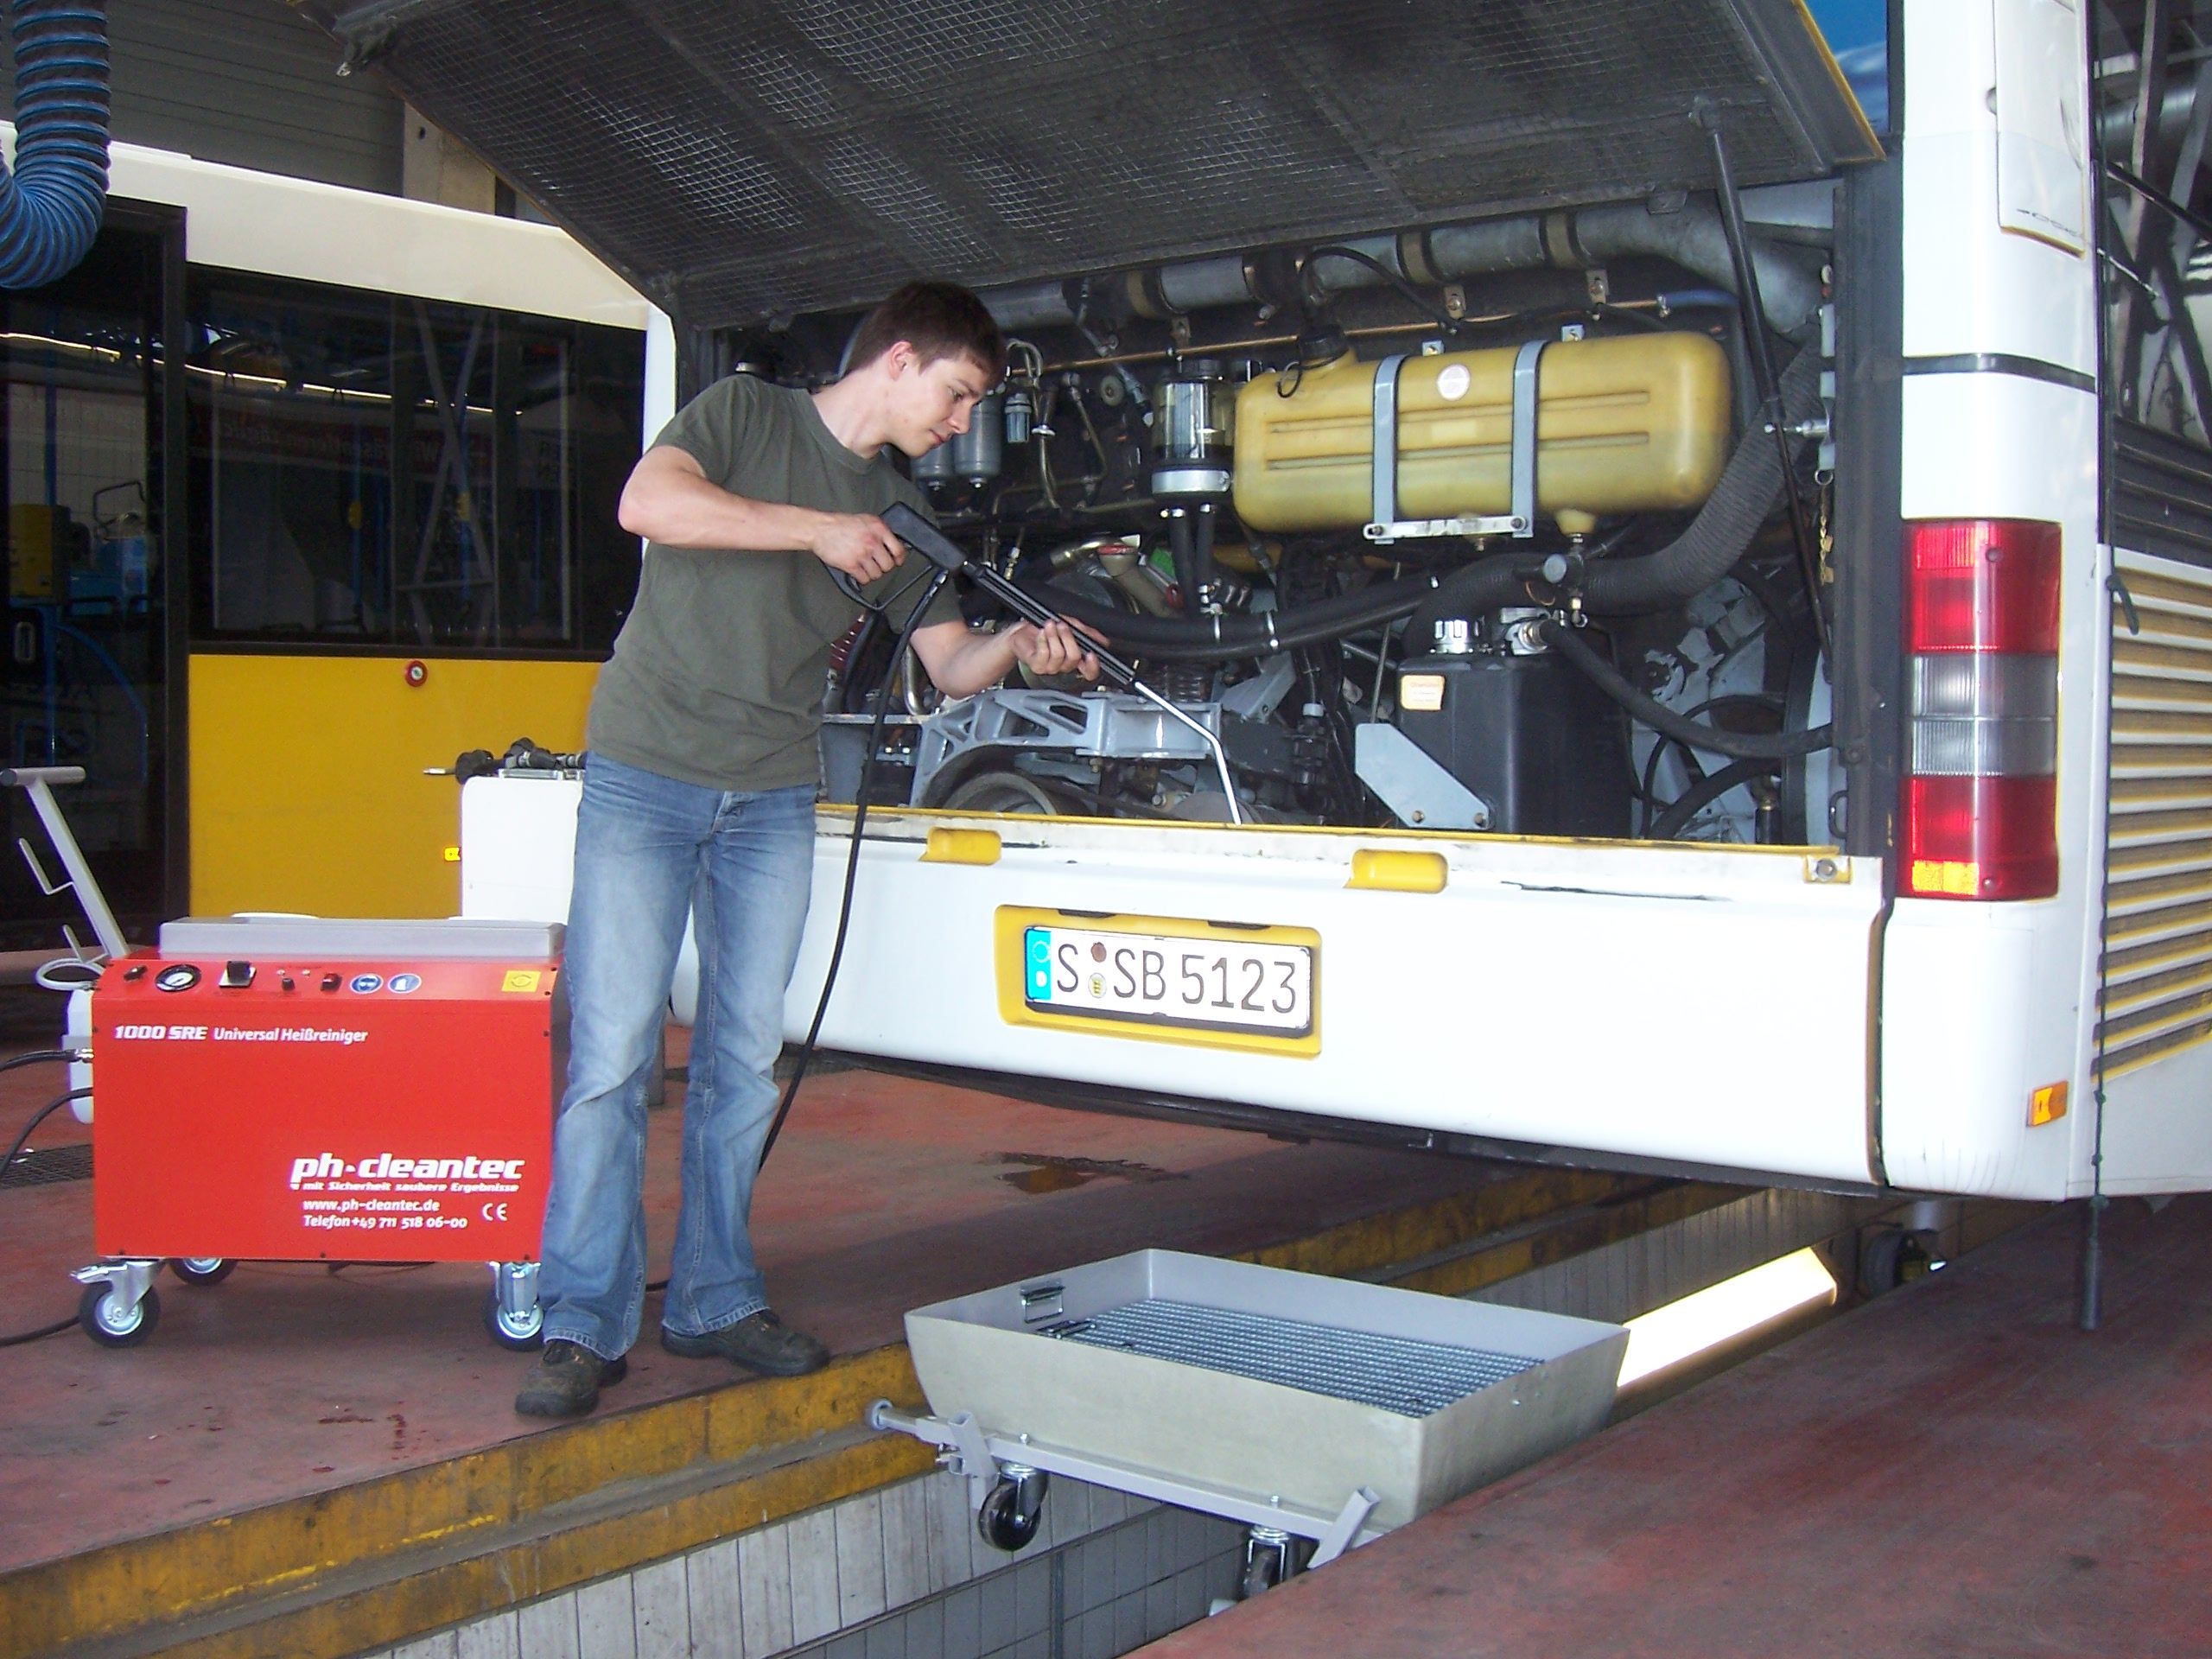 Cleaning the engine compartment of a public transport bus, above the pit, at the pit, dirt water collector